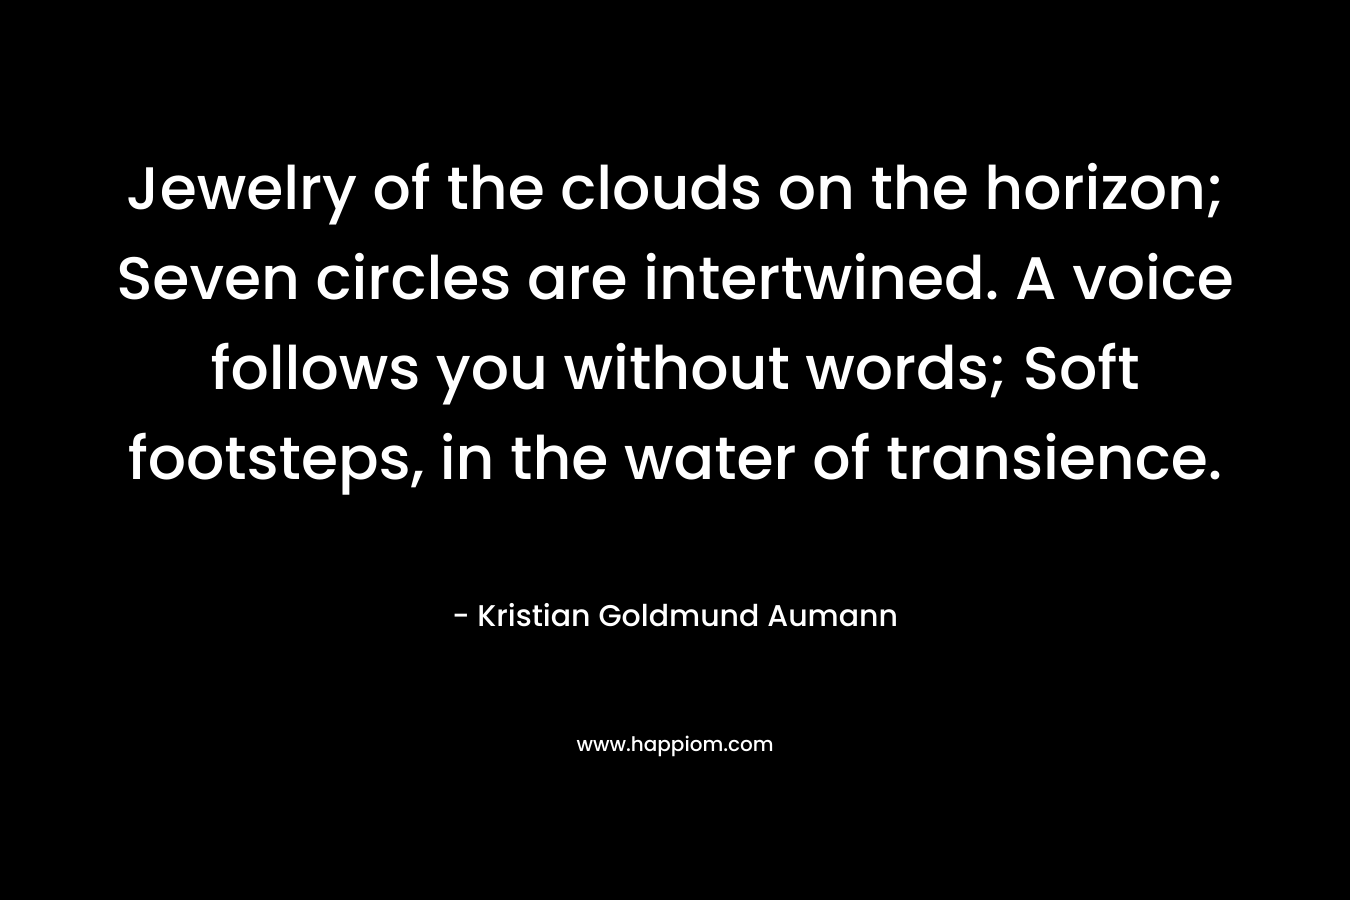 Jewelry of the clouds on the horizon; Seven circles are intertwined. A voice follows you without words; Soft footsteps, in the water of transience.